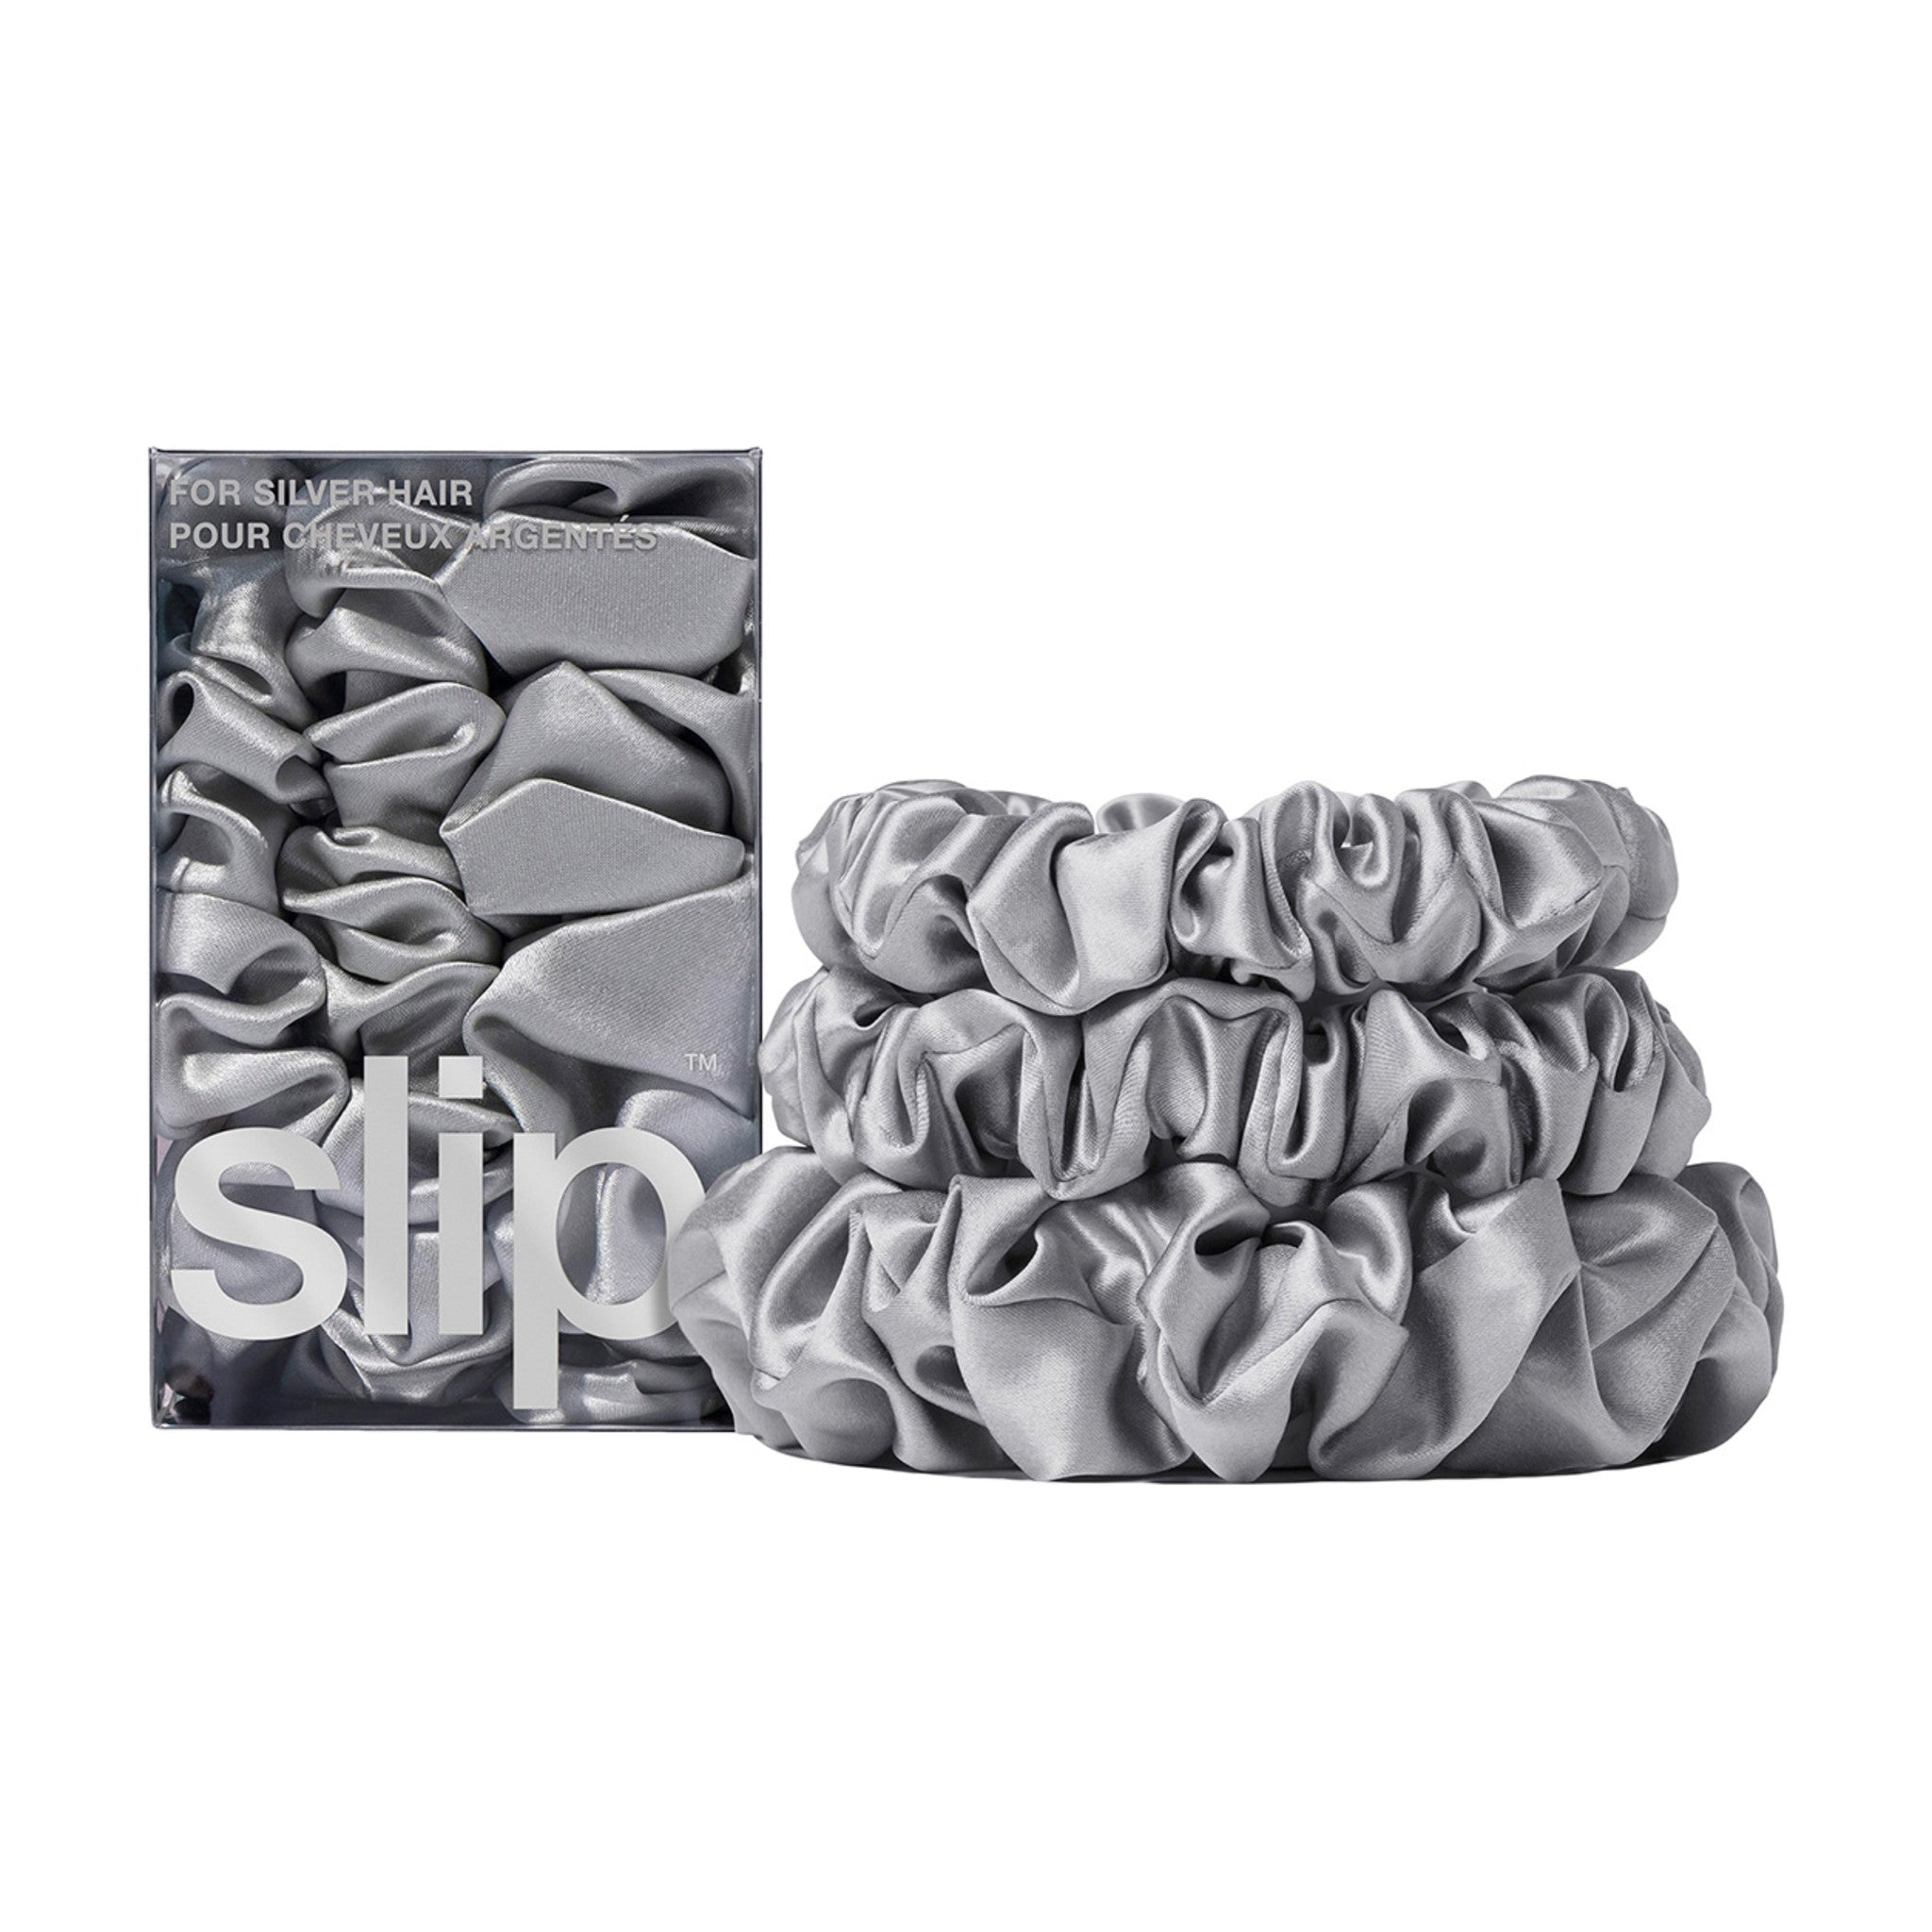 Slip Back to Basics Assorted Scrunchies Color/Shade variant: Silver main image.